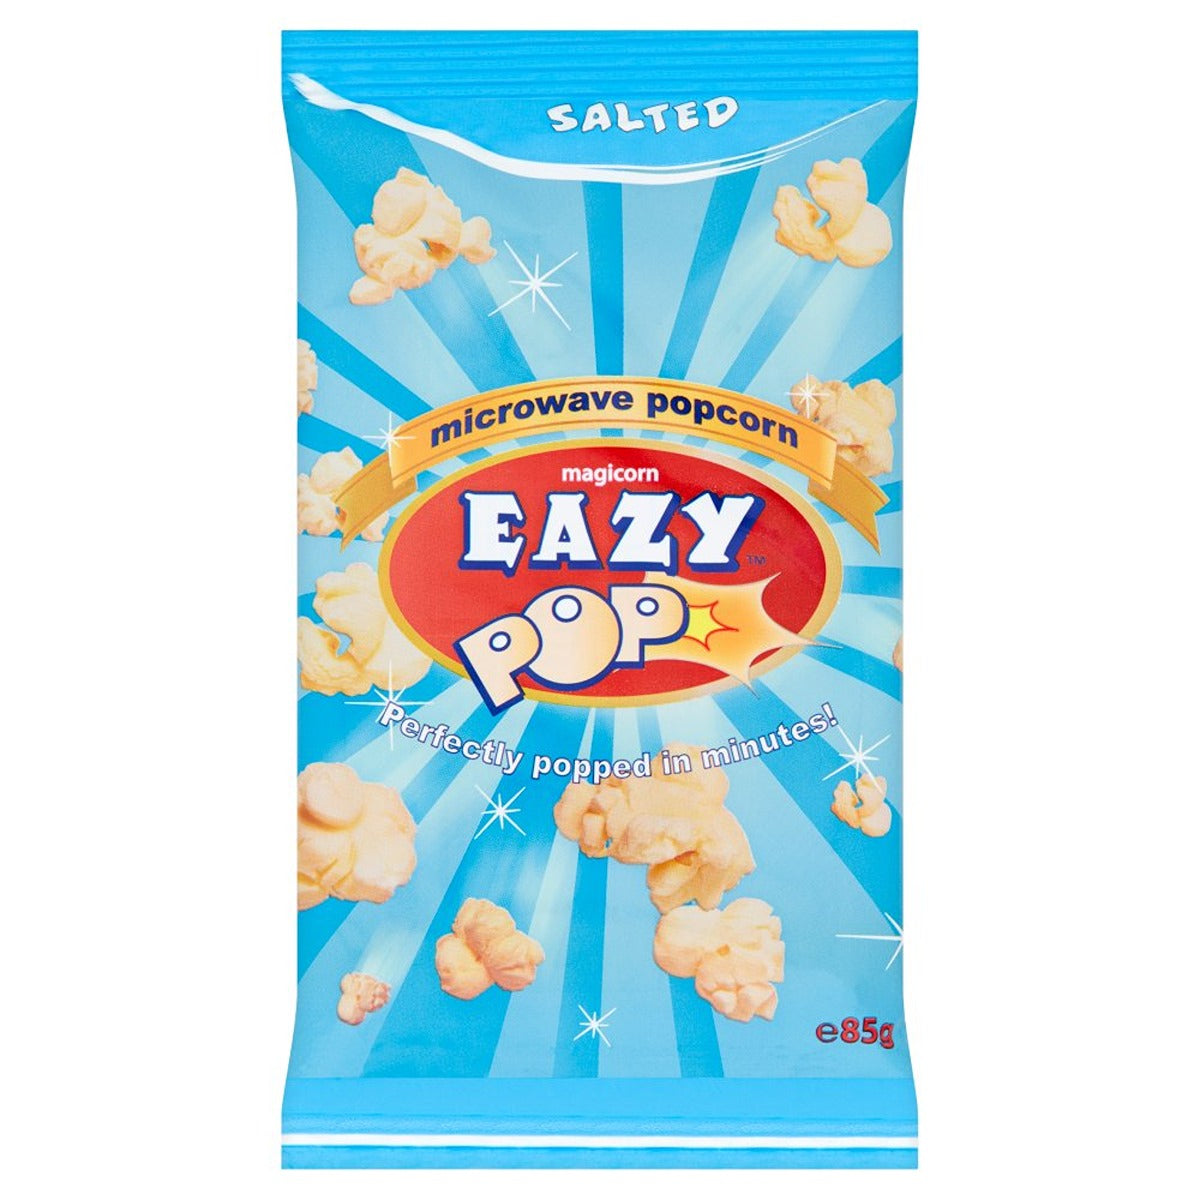 A bag of Eazy Pop - Magicorn Salted Microwave Popcorn - 85g on a white background.